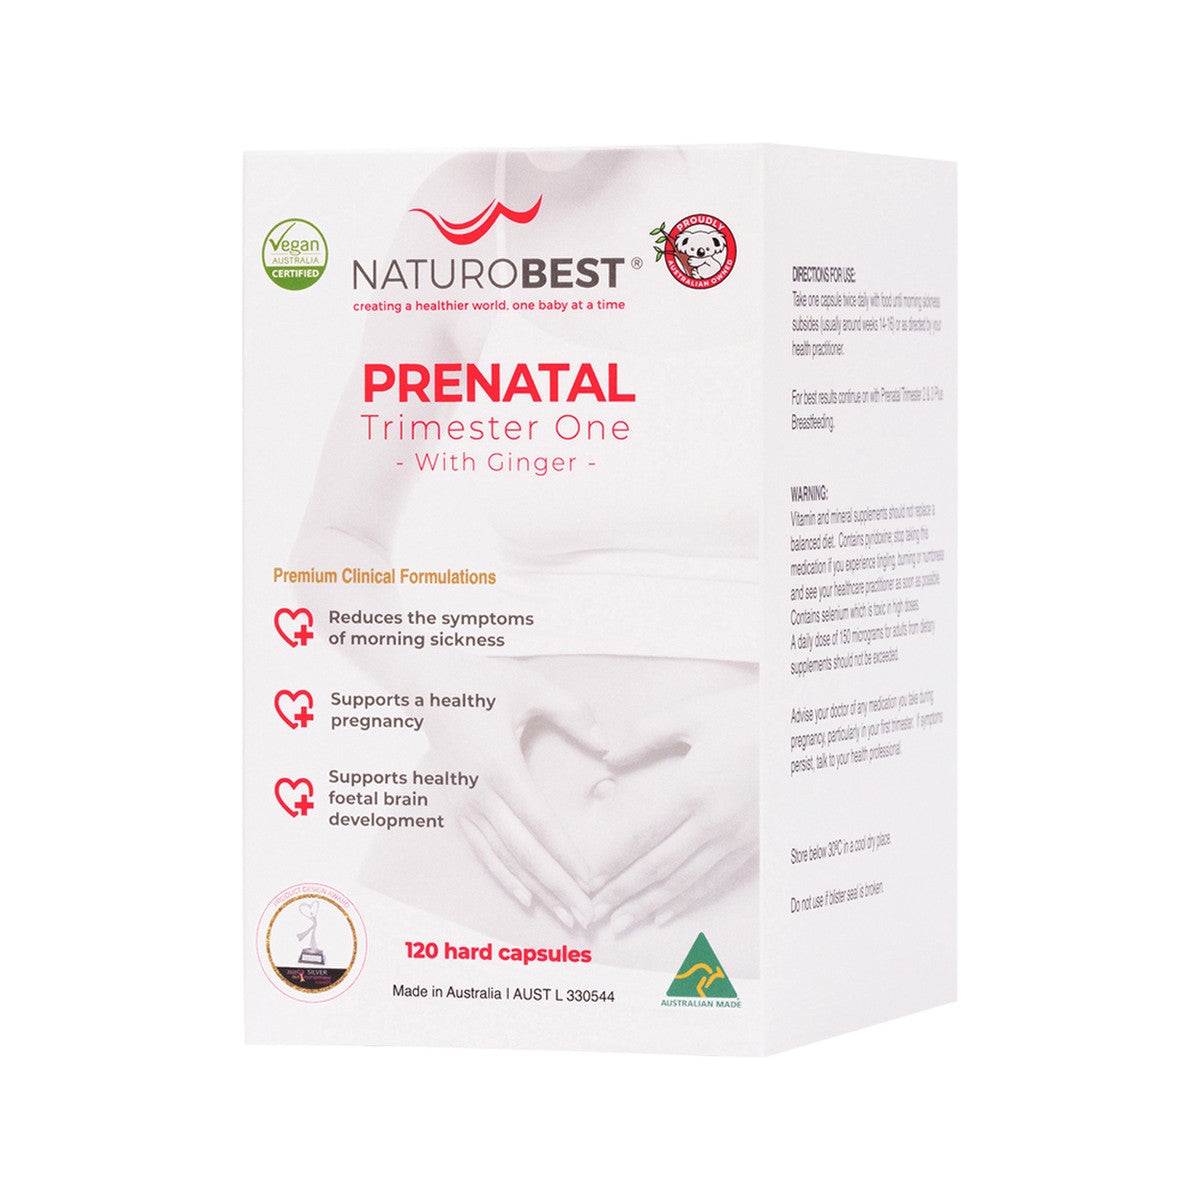 NaturoBest - Prenatal Trimester One with Ginger